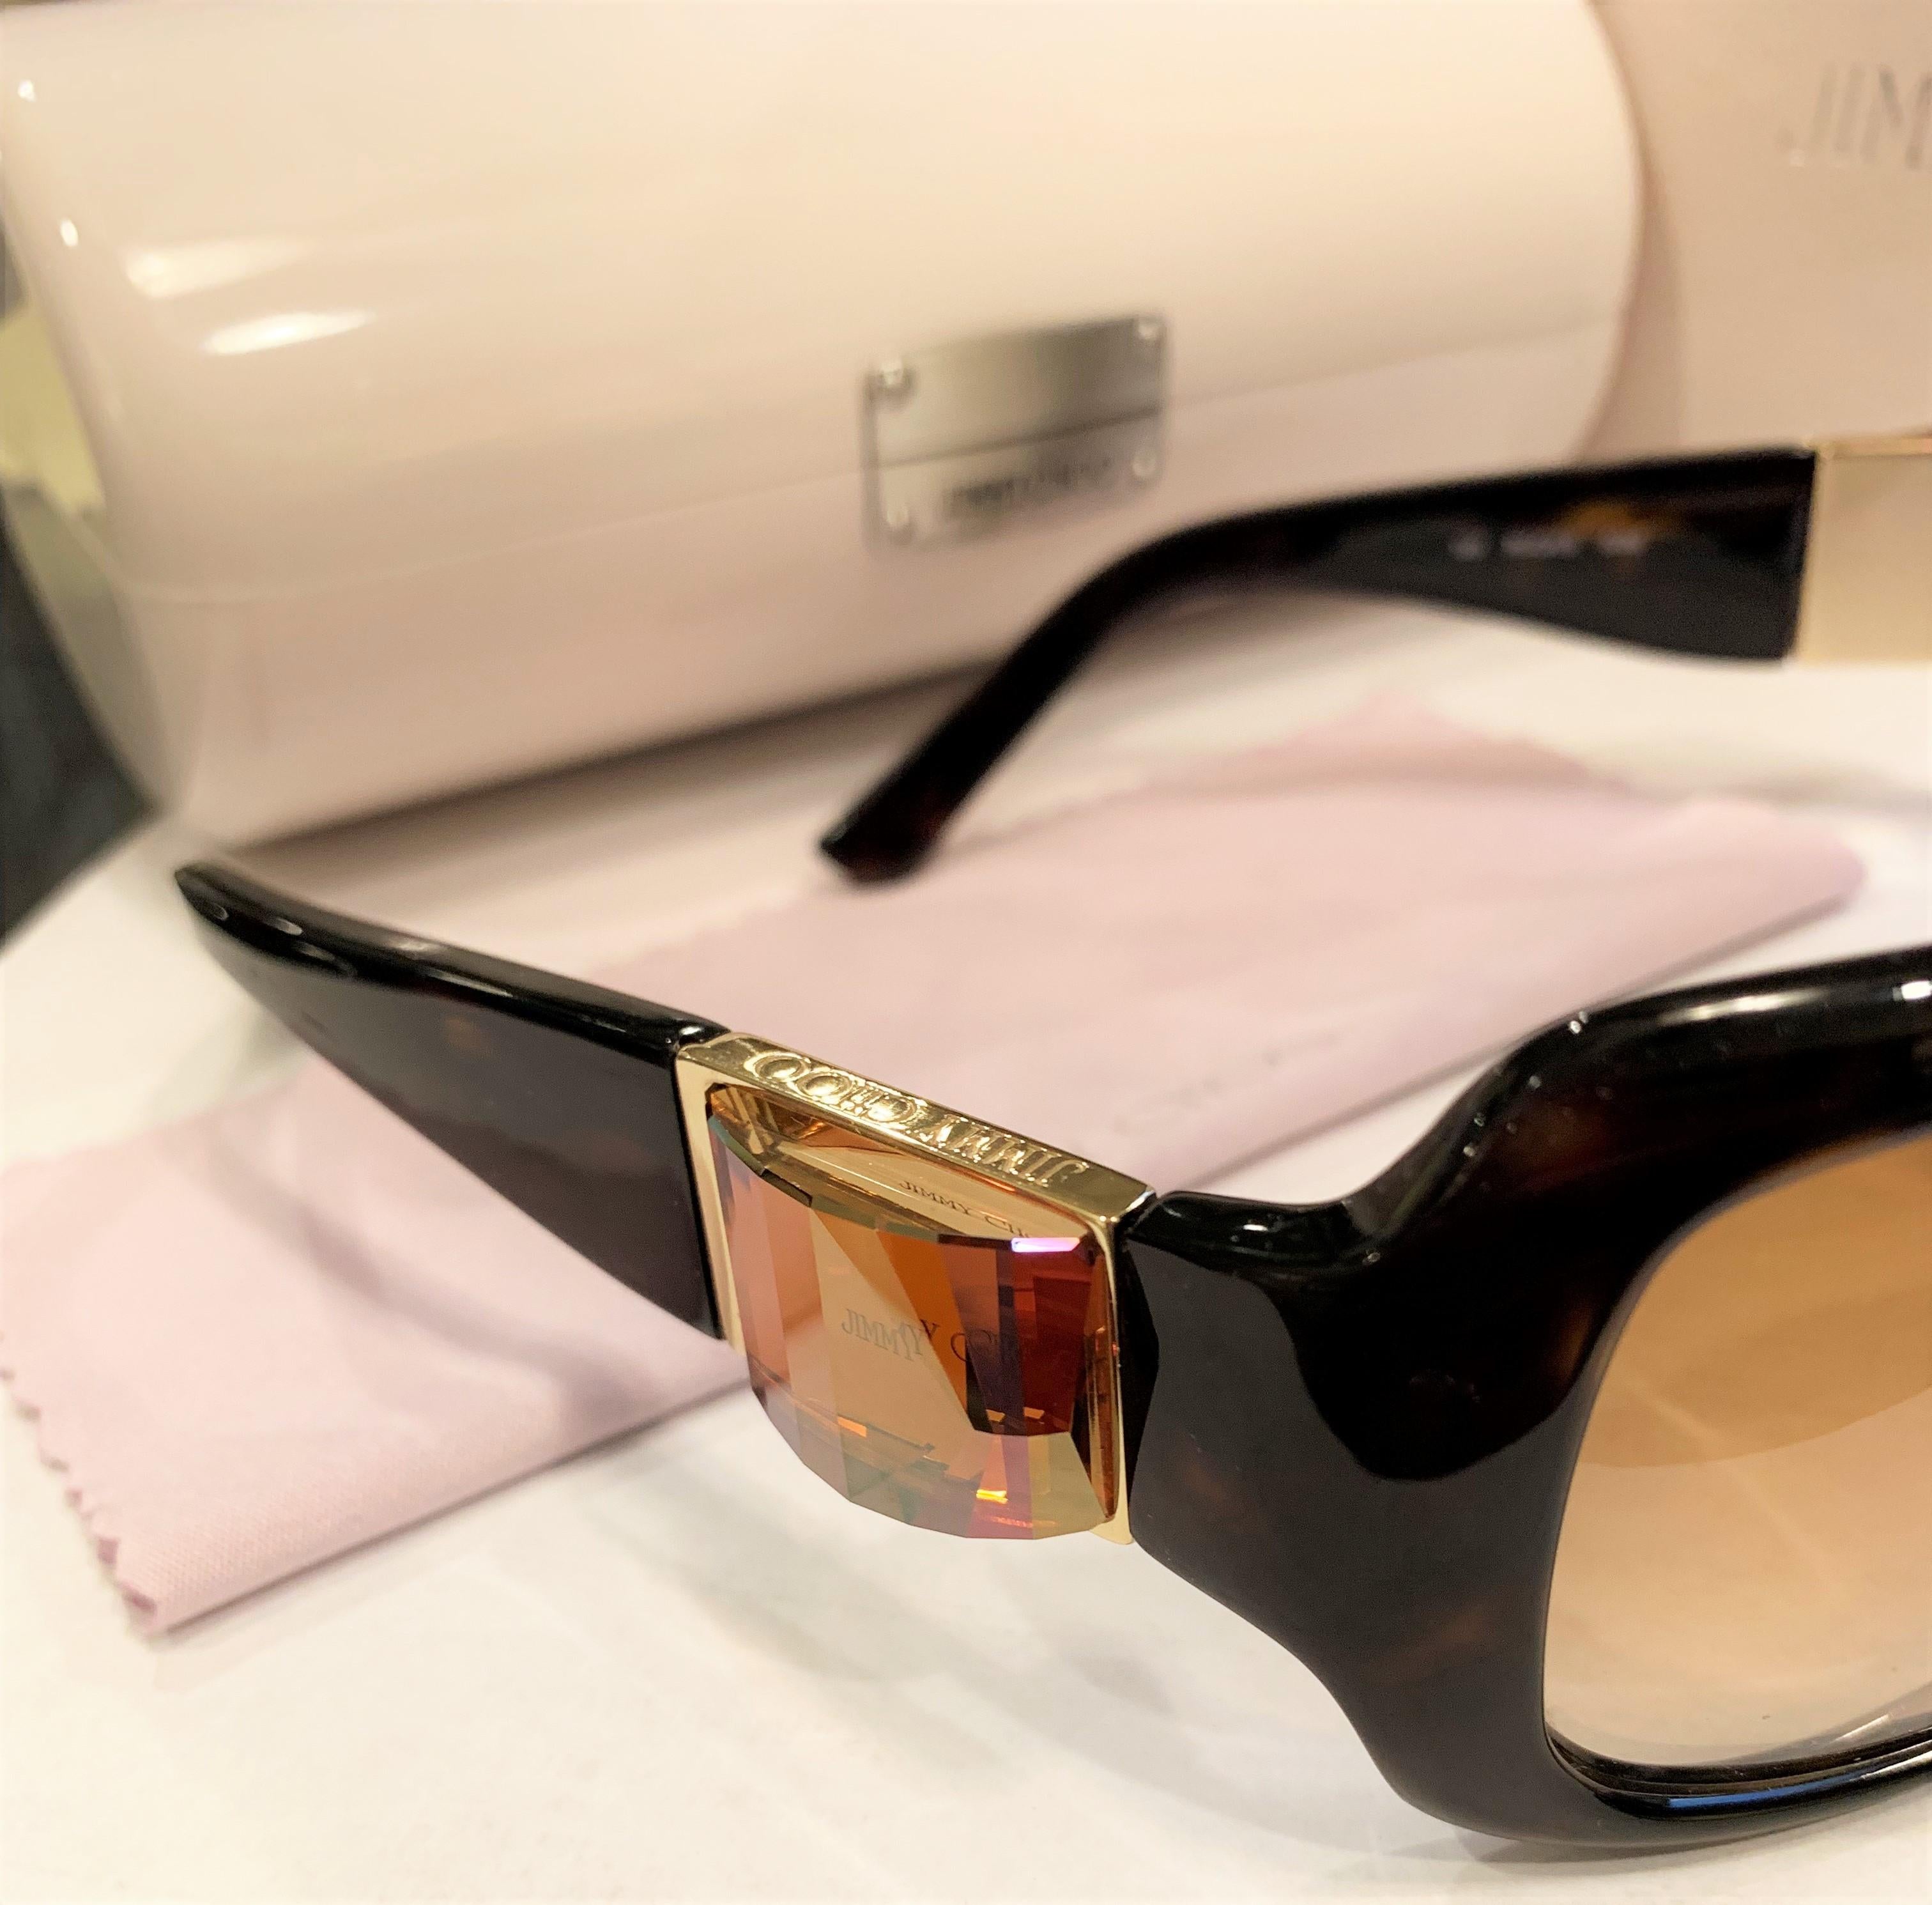 Jimmy Choo
Brand New
*Stunning in Dark Brown
* Gold Hardware
* Swarovski Crystal at Temples
* Resin Frames
* ROCK/S 
* Made in Italy
* 100% UVA/UVB Protection
* Comes with Case, Cleaning Cloth & Box